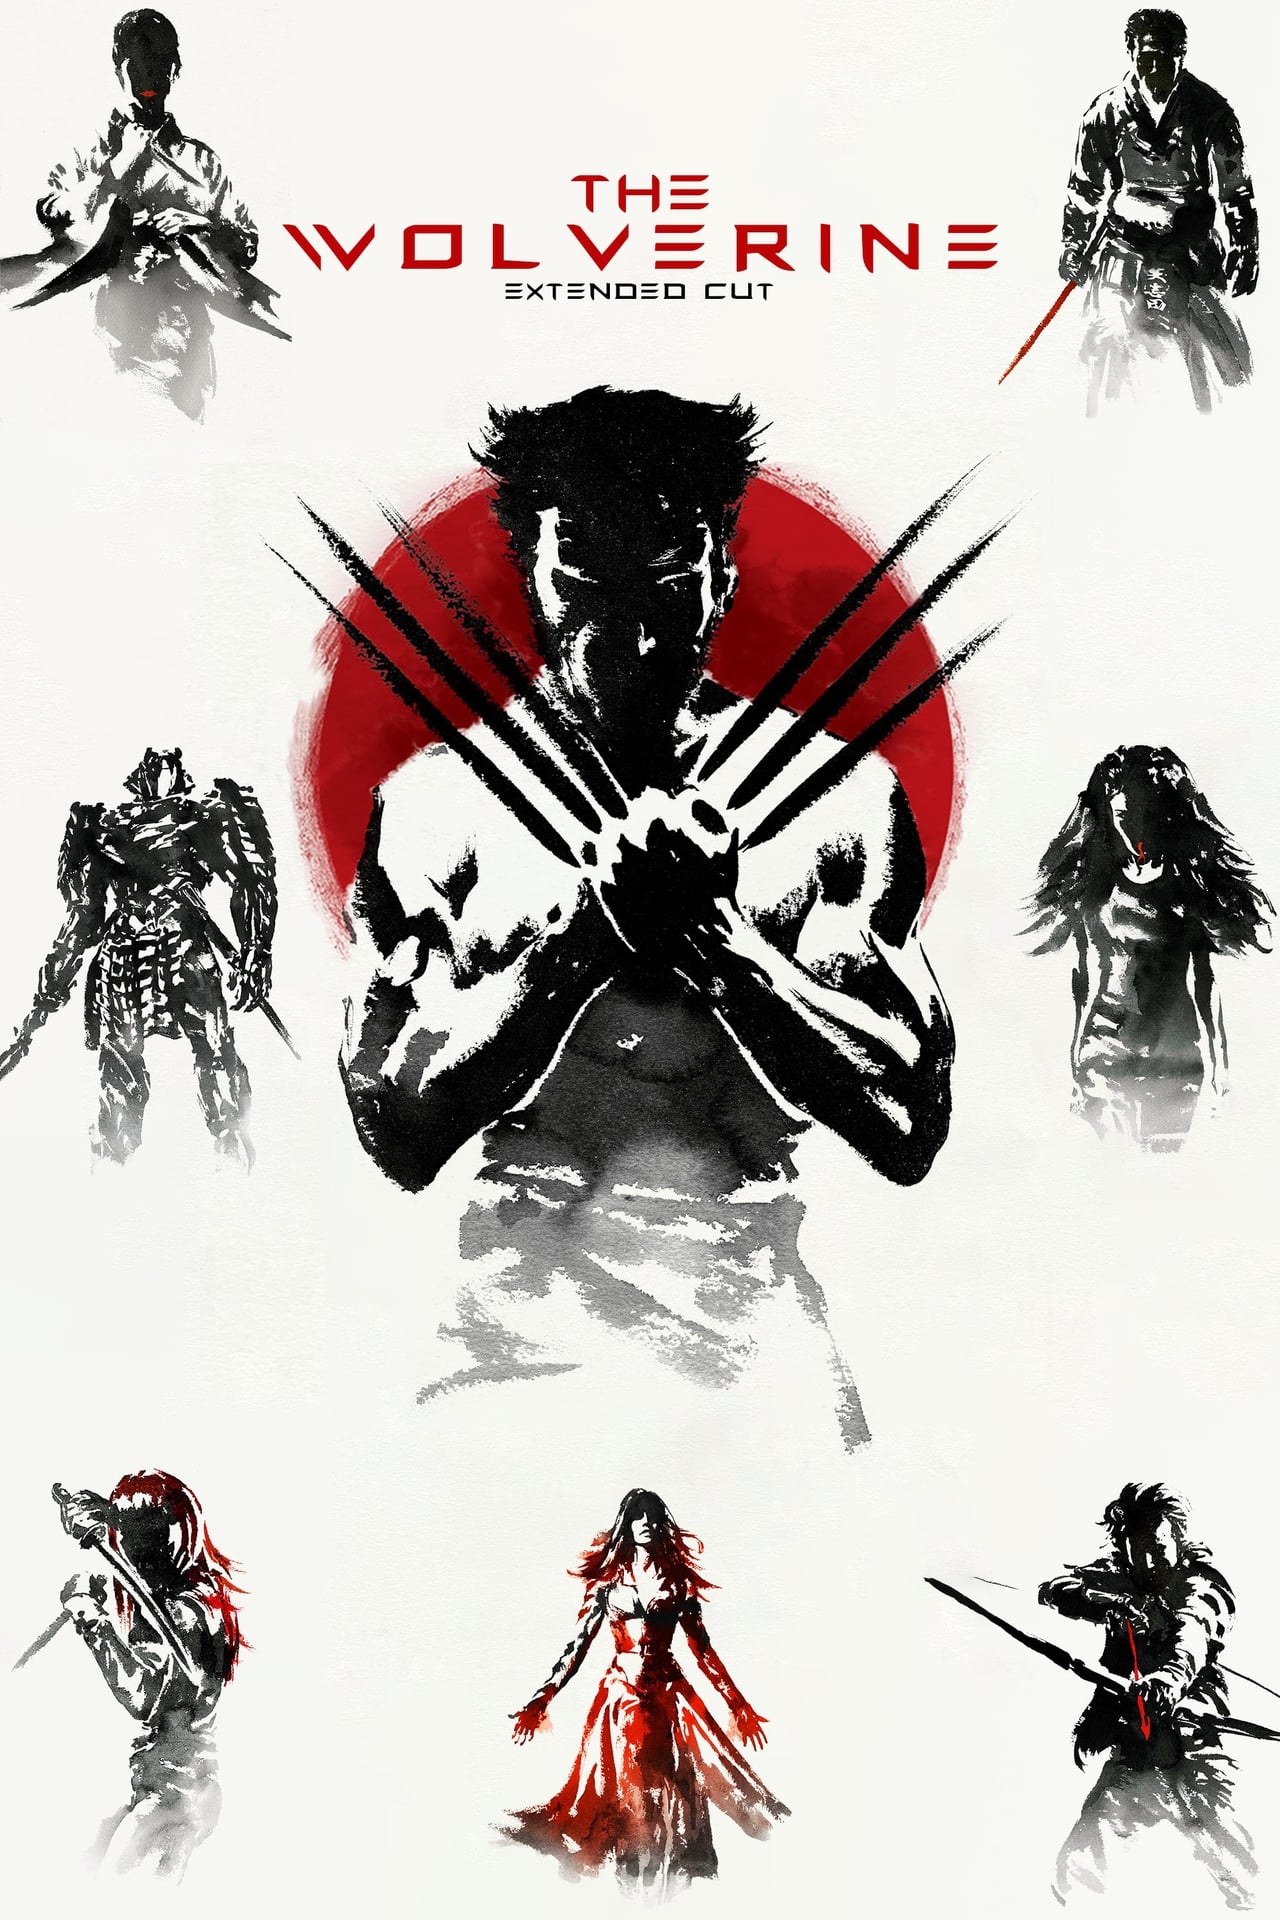 The Wolverine (2013) Extended Cut 448Kbps 23.976Fps 48Khz 5.1Ch BluRay Turkish Audio TAC